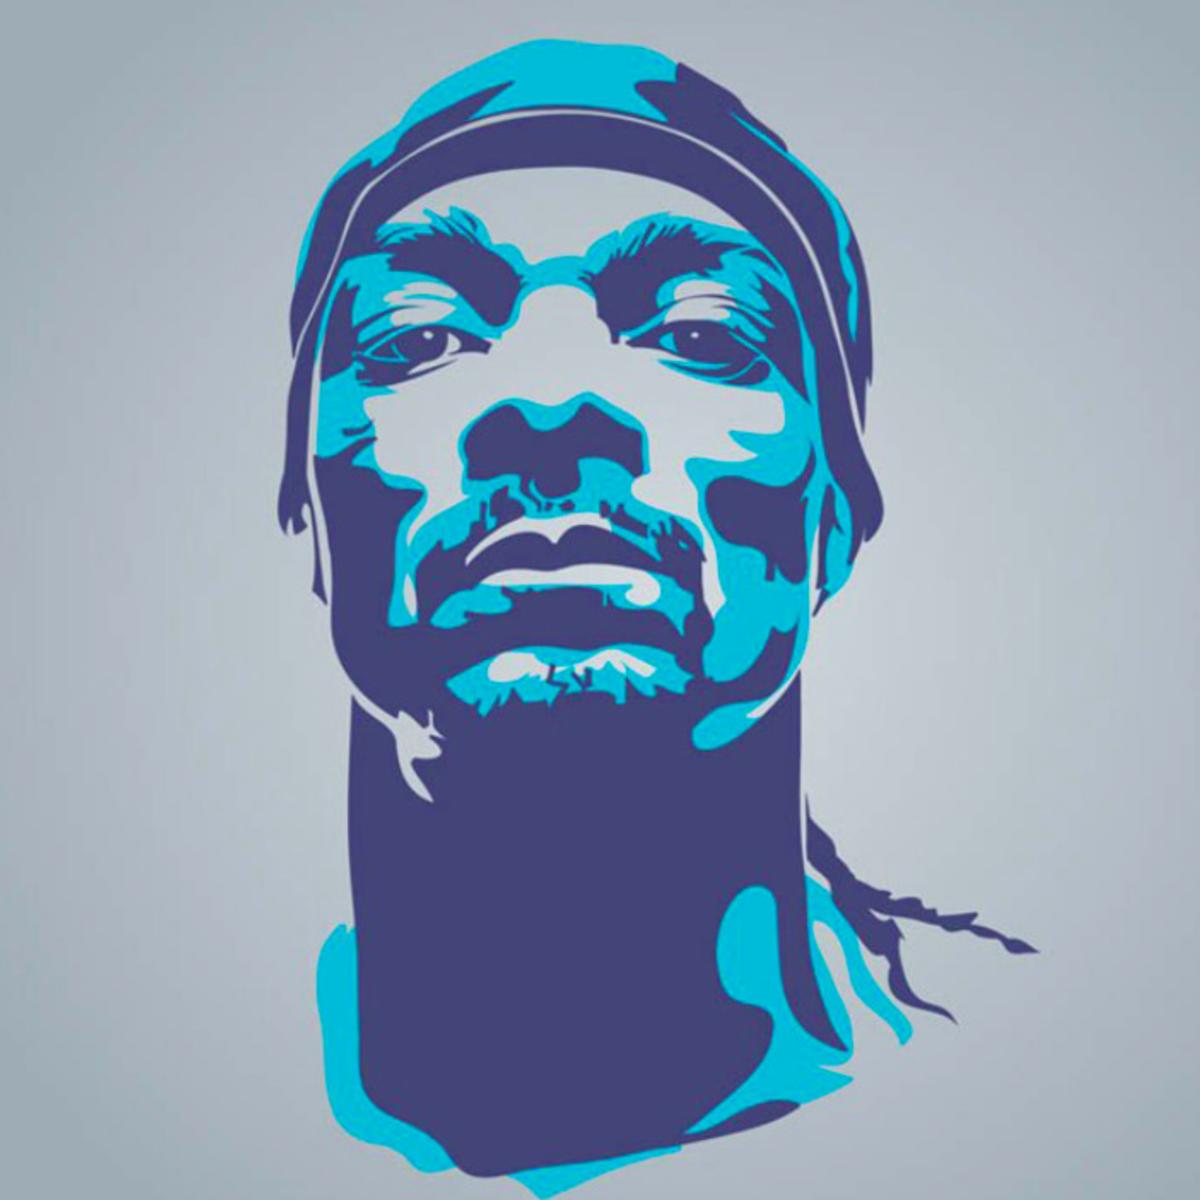 Listen To “Metaverse: The NFT Drop, Vol. 2” By Snoop Dogg